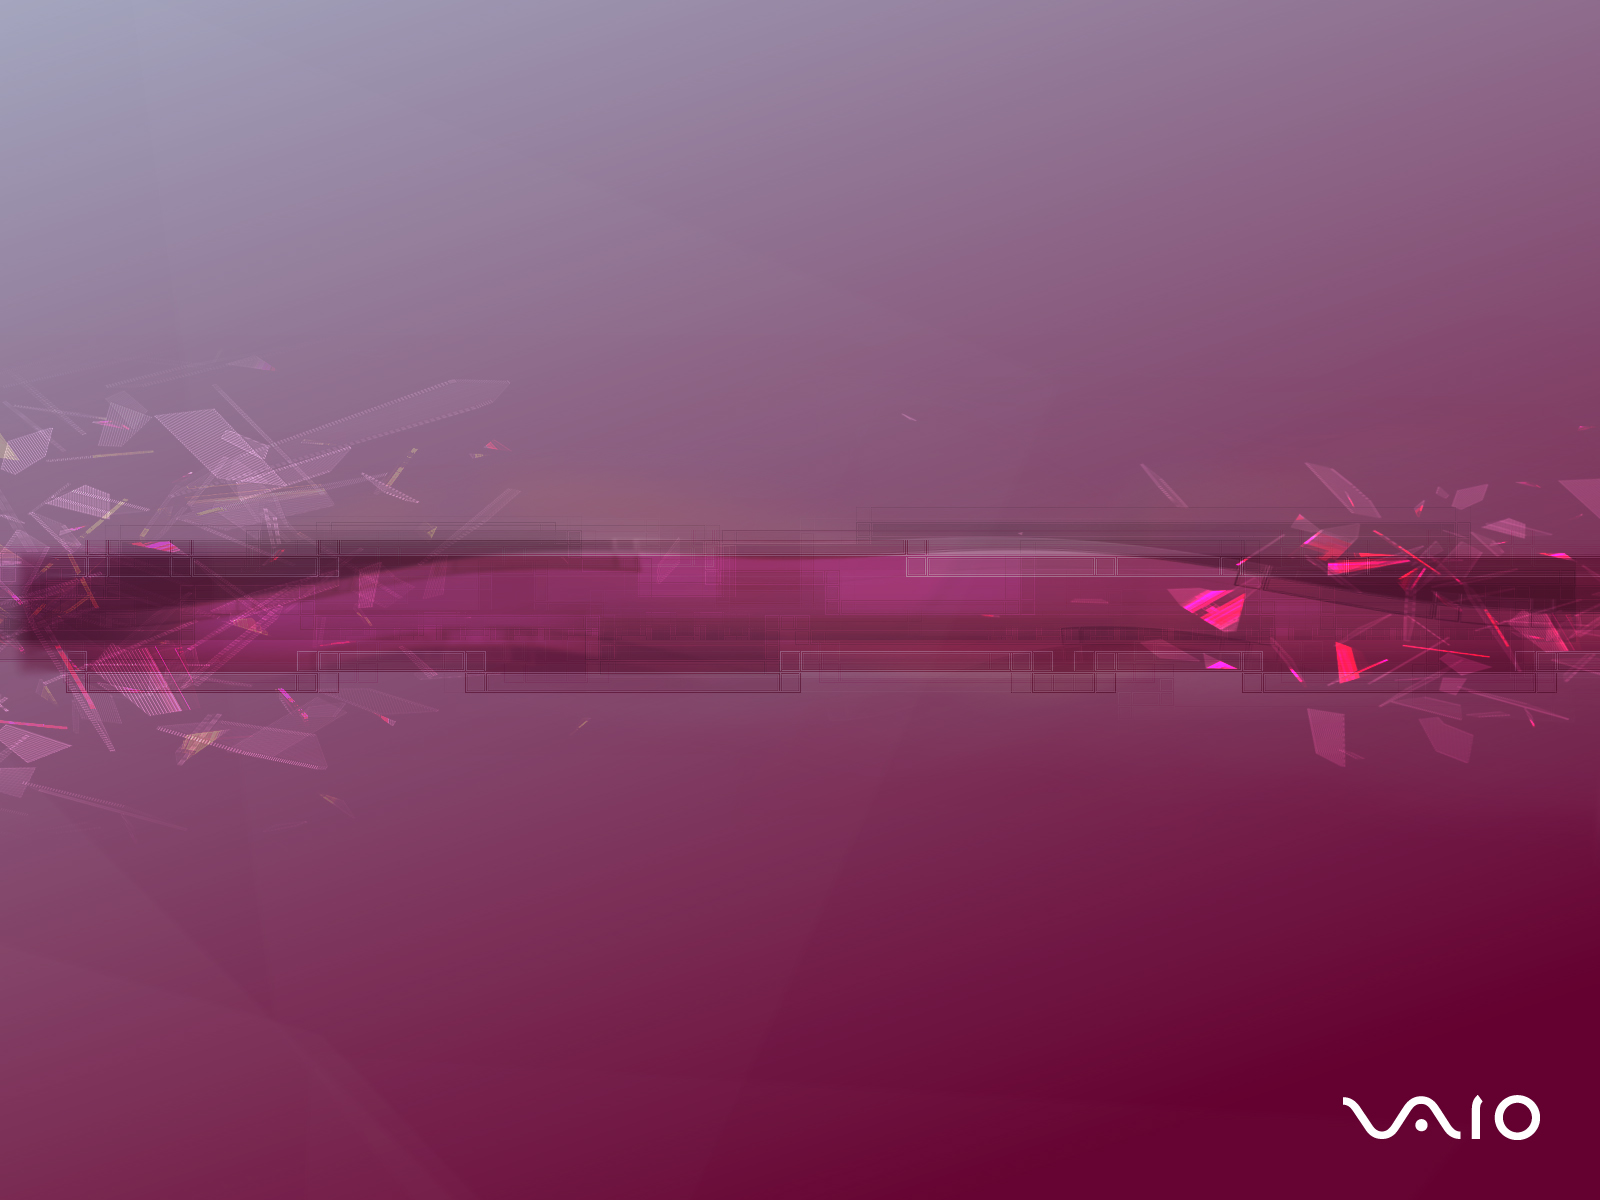 Sony VAIO 8 Wallpapers HD Wallpapers 1600x1200